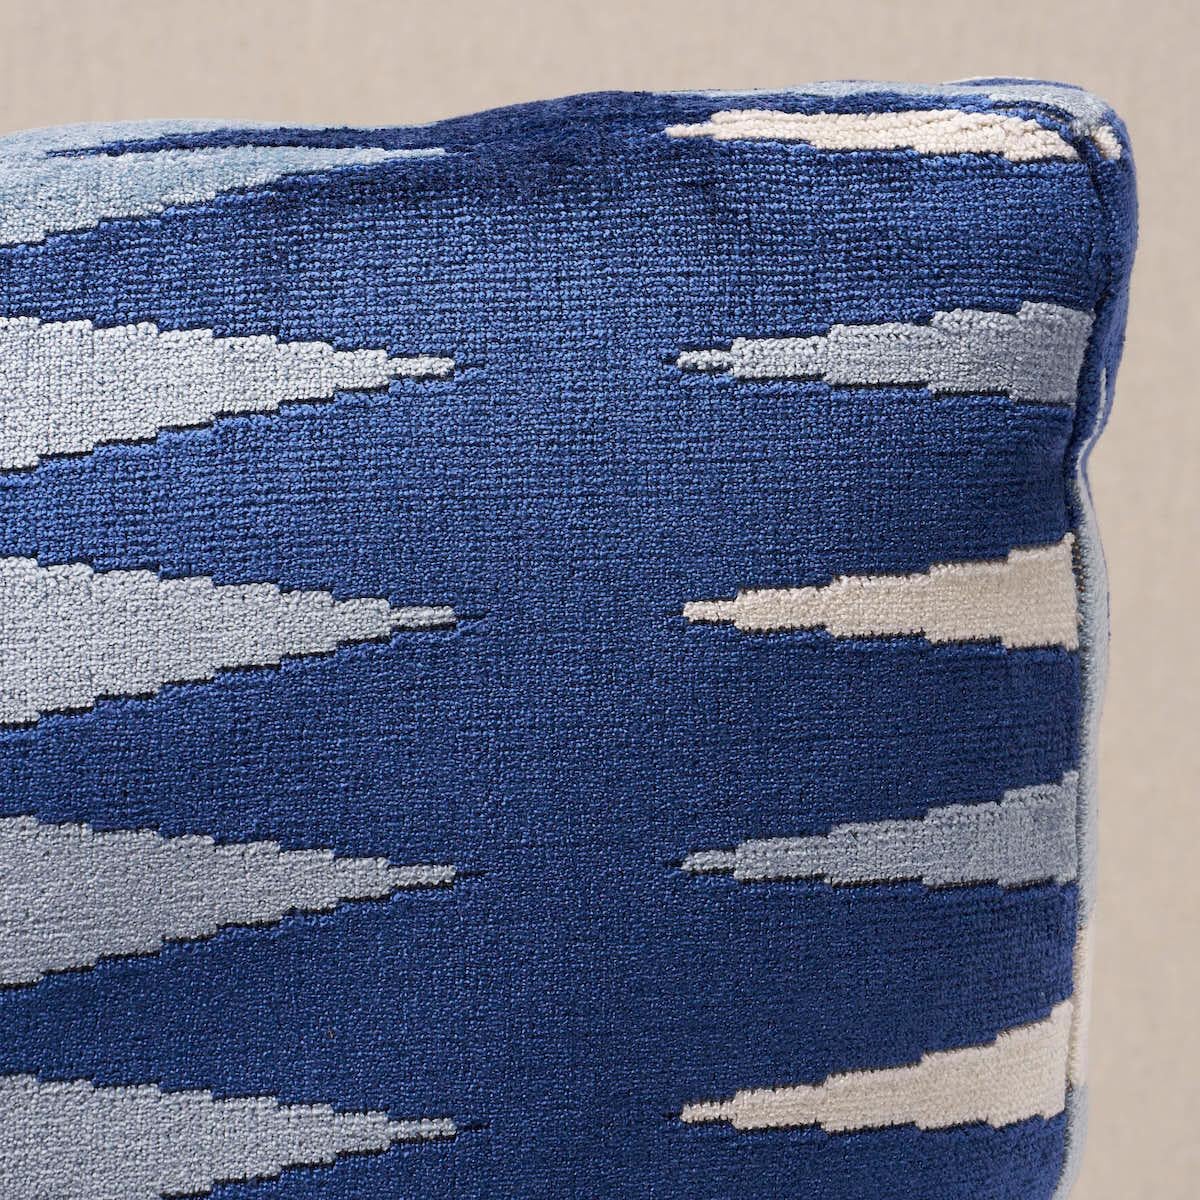 This pillow features Backgammon Cut Velvet by Mary McDonaldwith a box edge finish. Mary McDonald was inspired by the alternating colors and pointed pips on backgammon boards when she created this sophisticated yet fun-spirited fabric design. Pillow